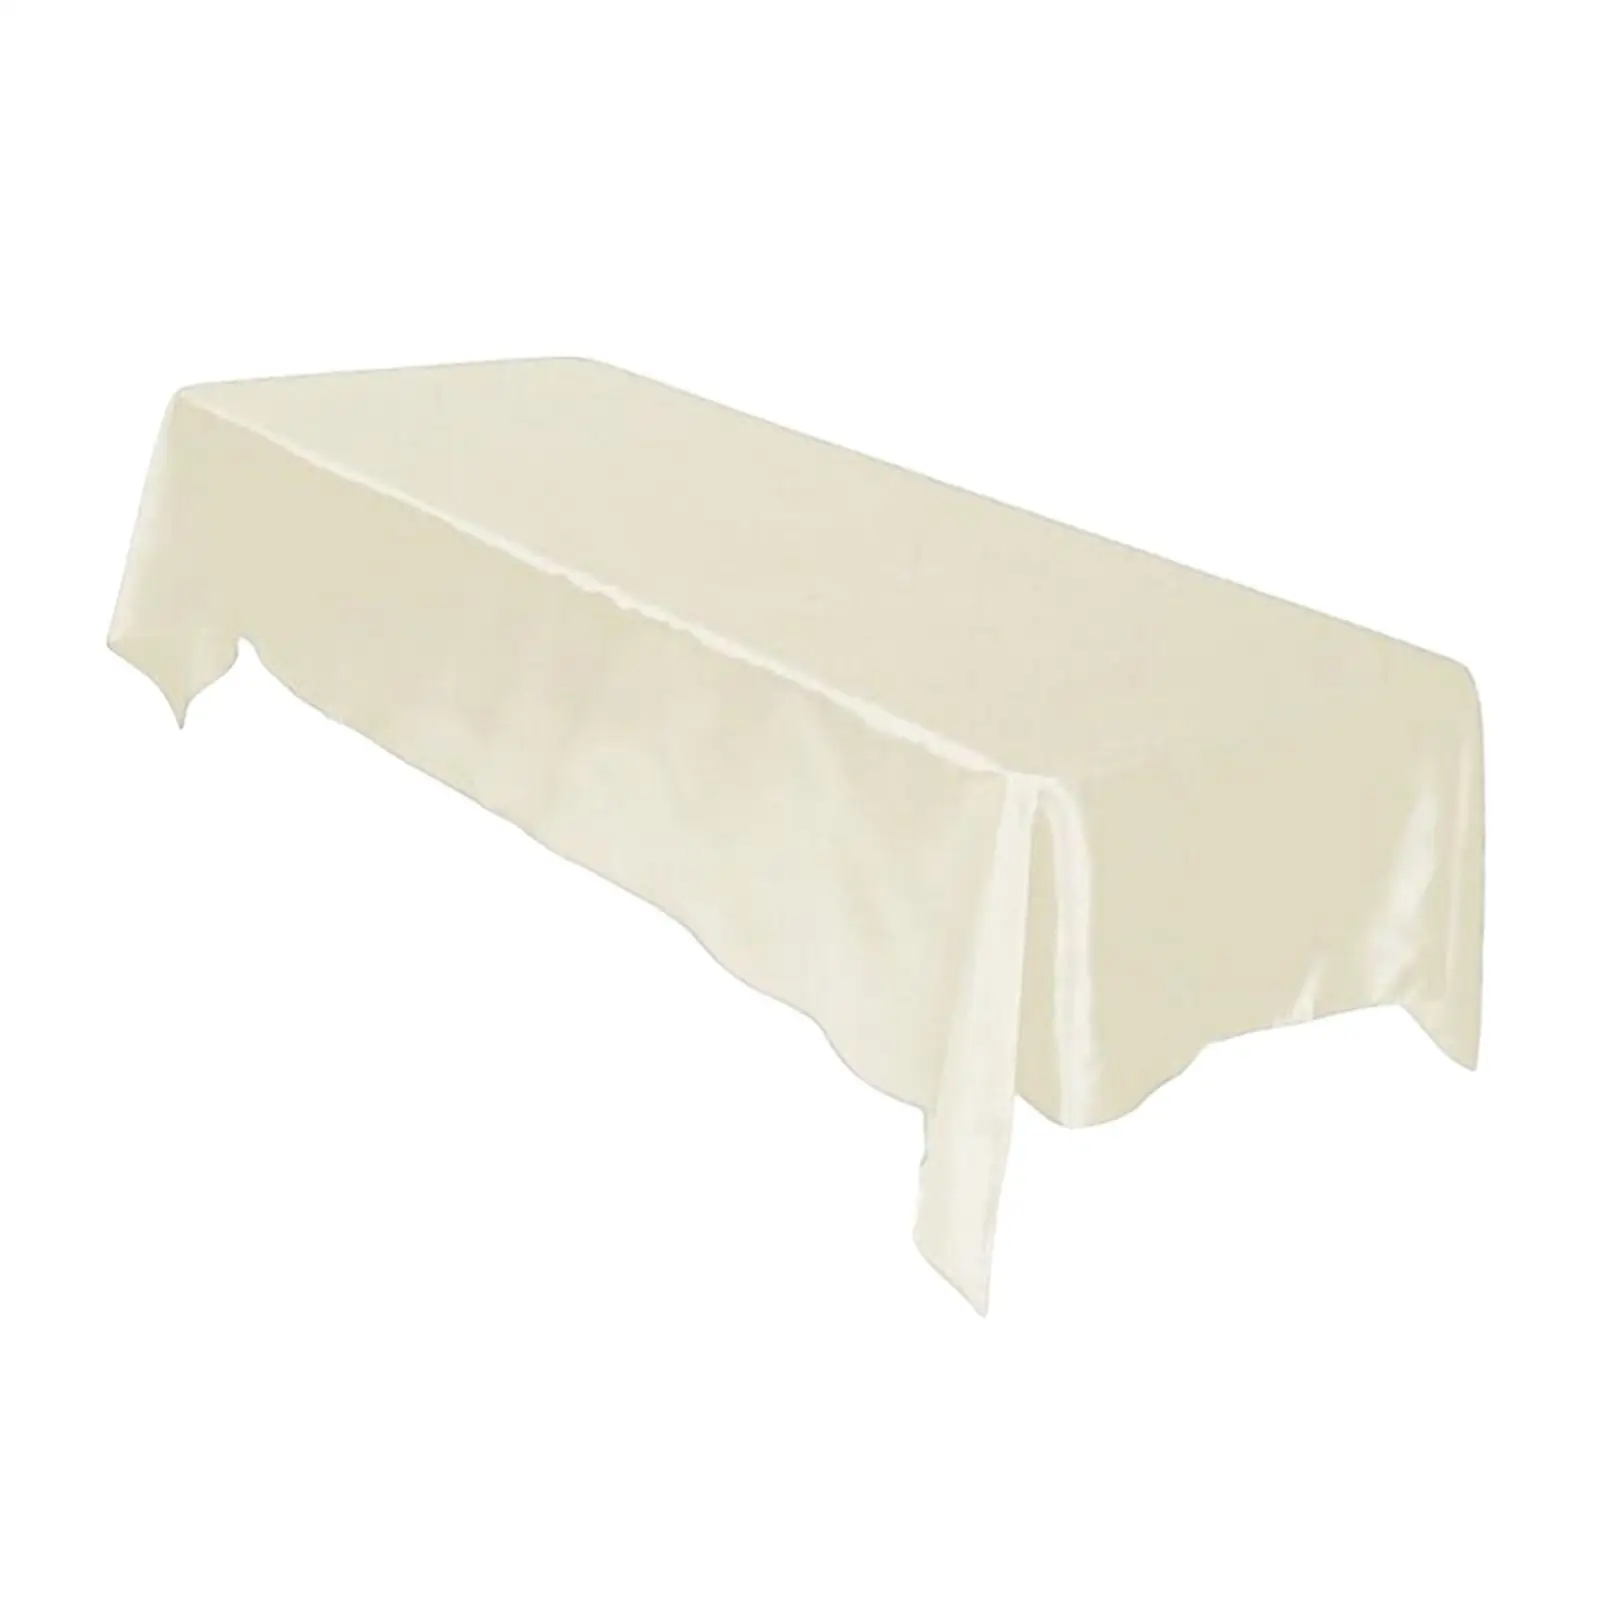 Rectangular Tablecloth 145x200cm Dining Table for Restaurant Holiday Banquet